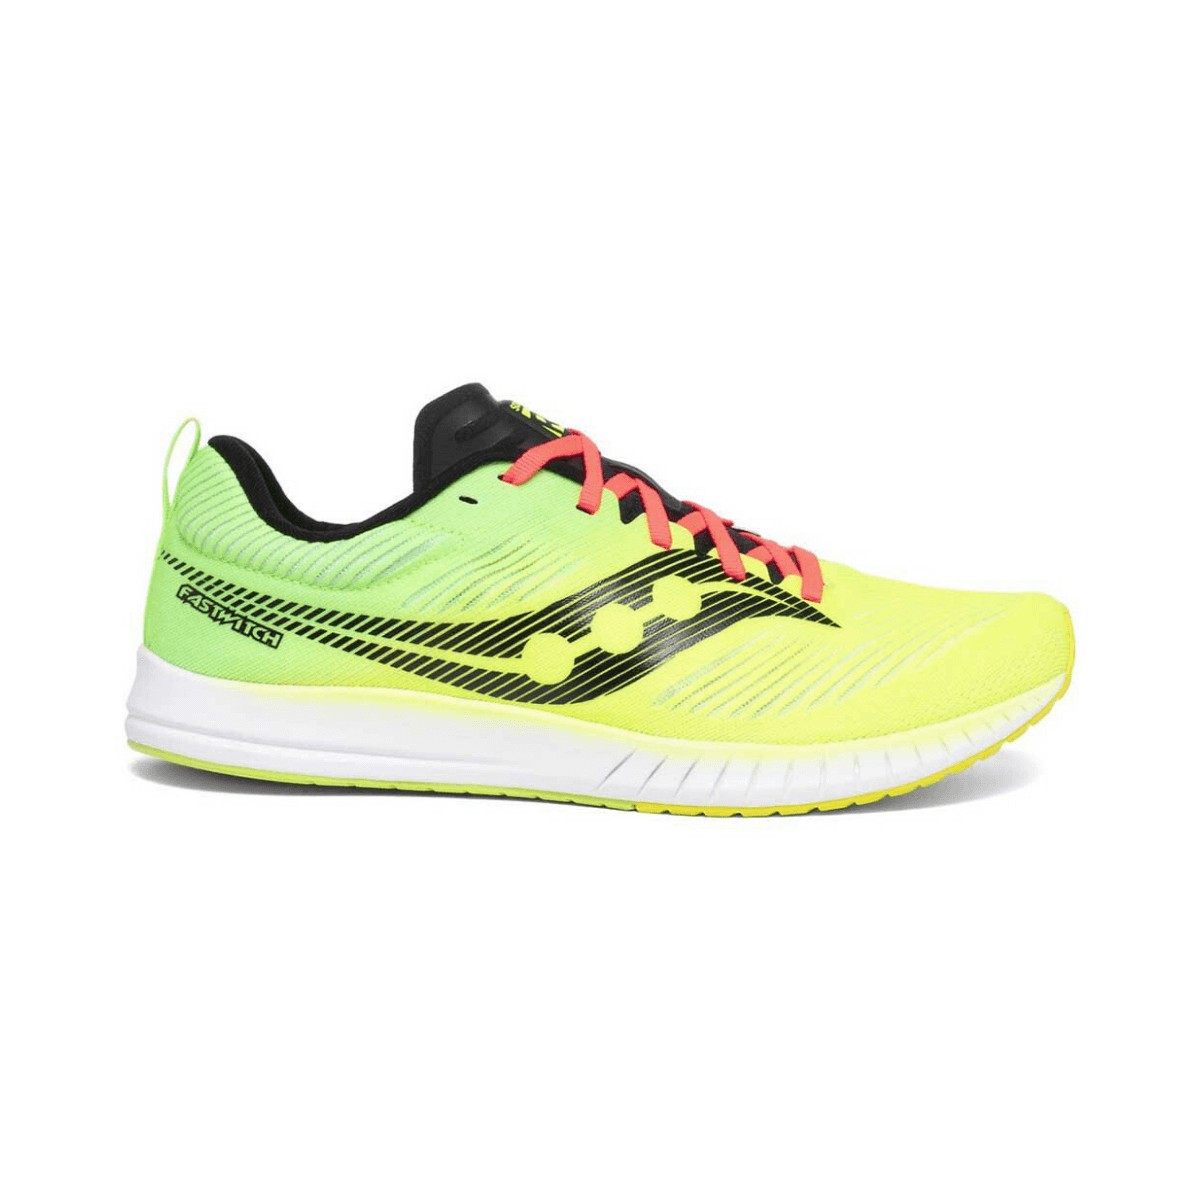 Saucony Fastwitch 9 Yellow SS20 Men's Running Shoes